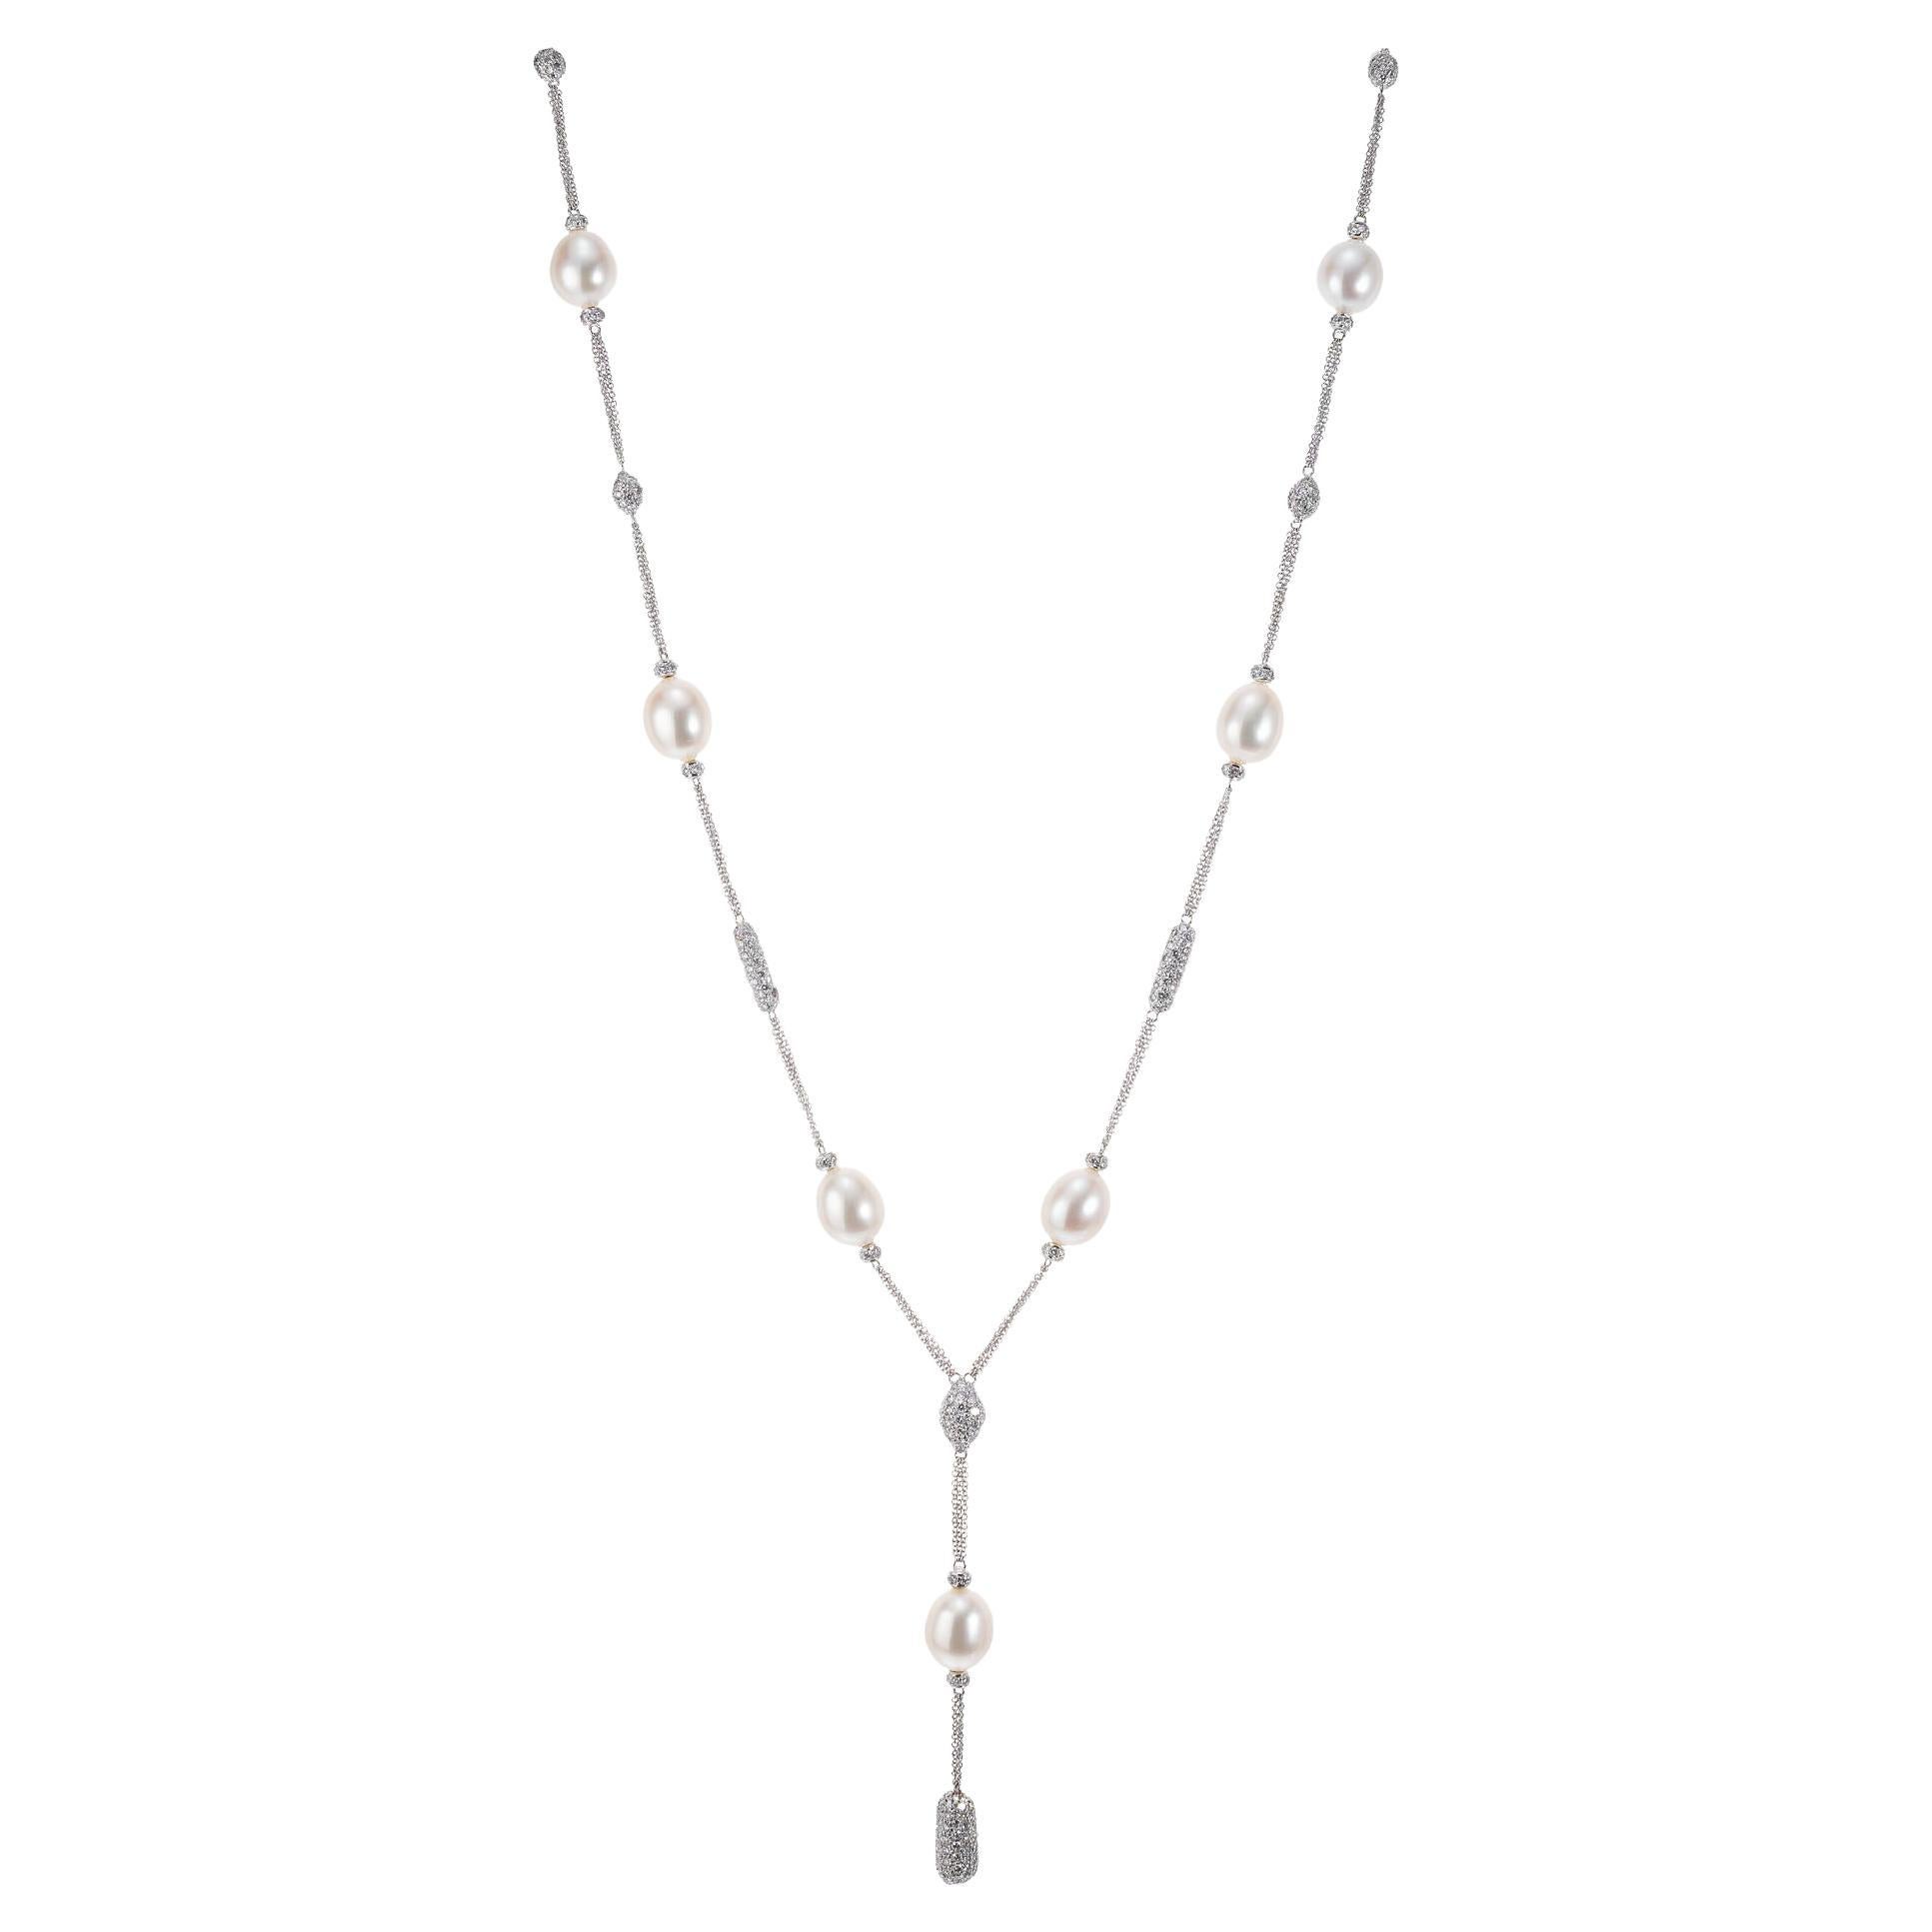 4.20 Carat Pave Diamond Freshwater Pearl White Gold Drop Necklace